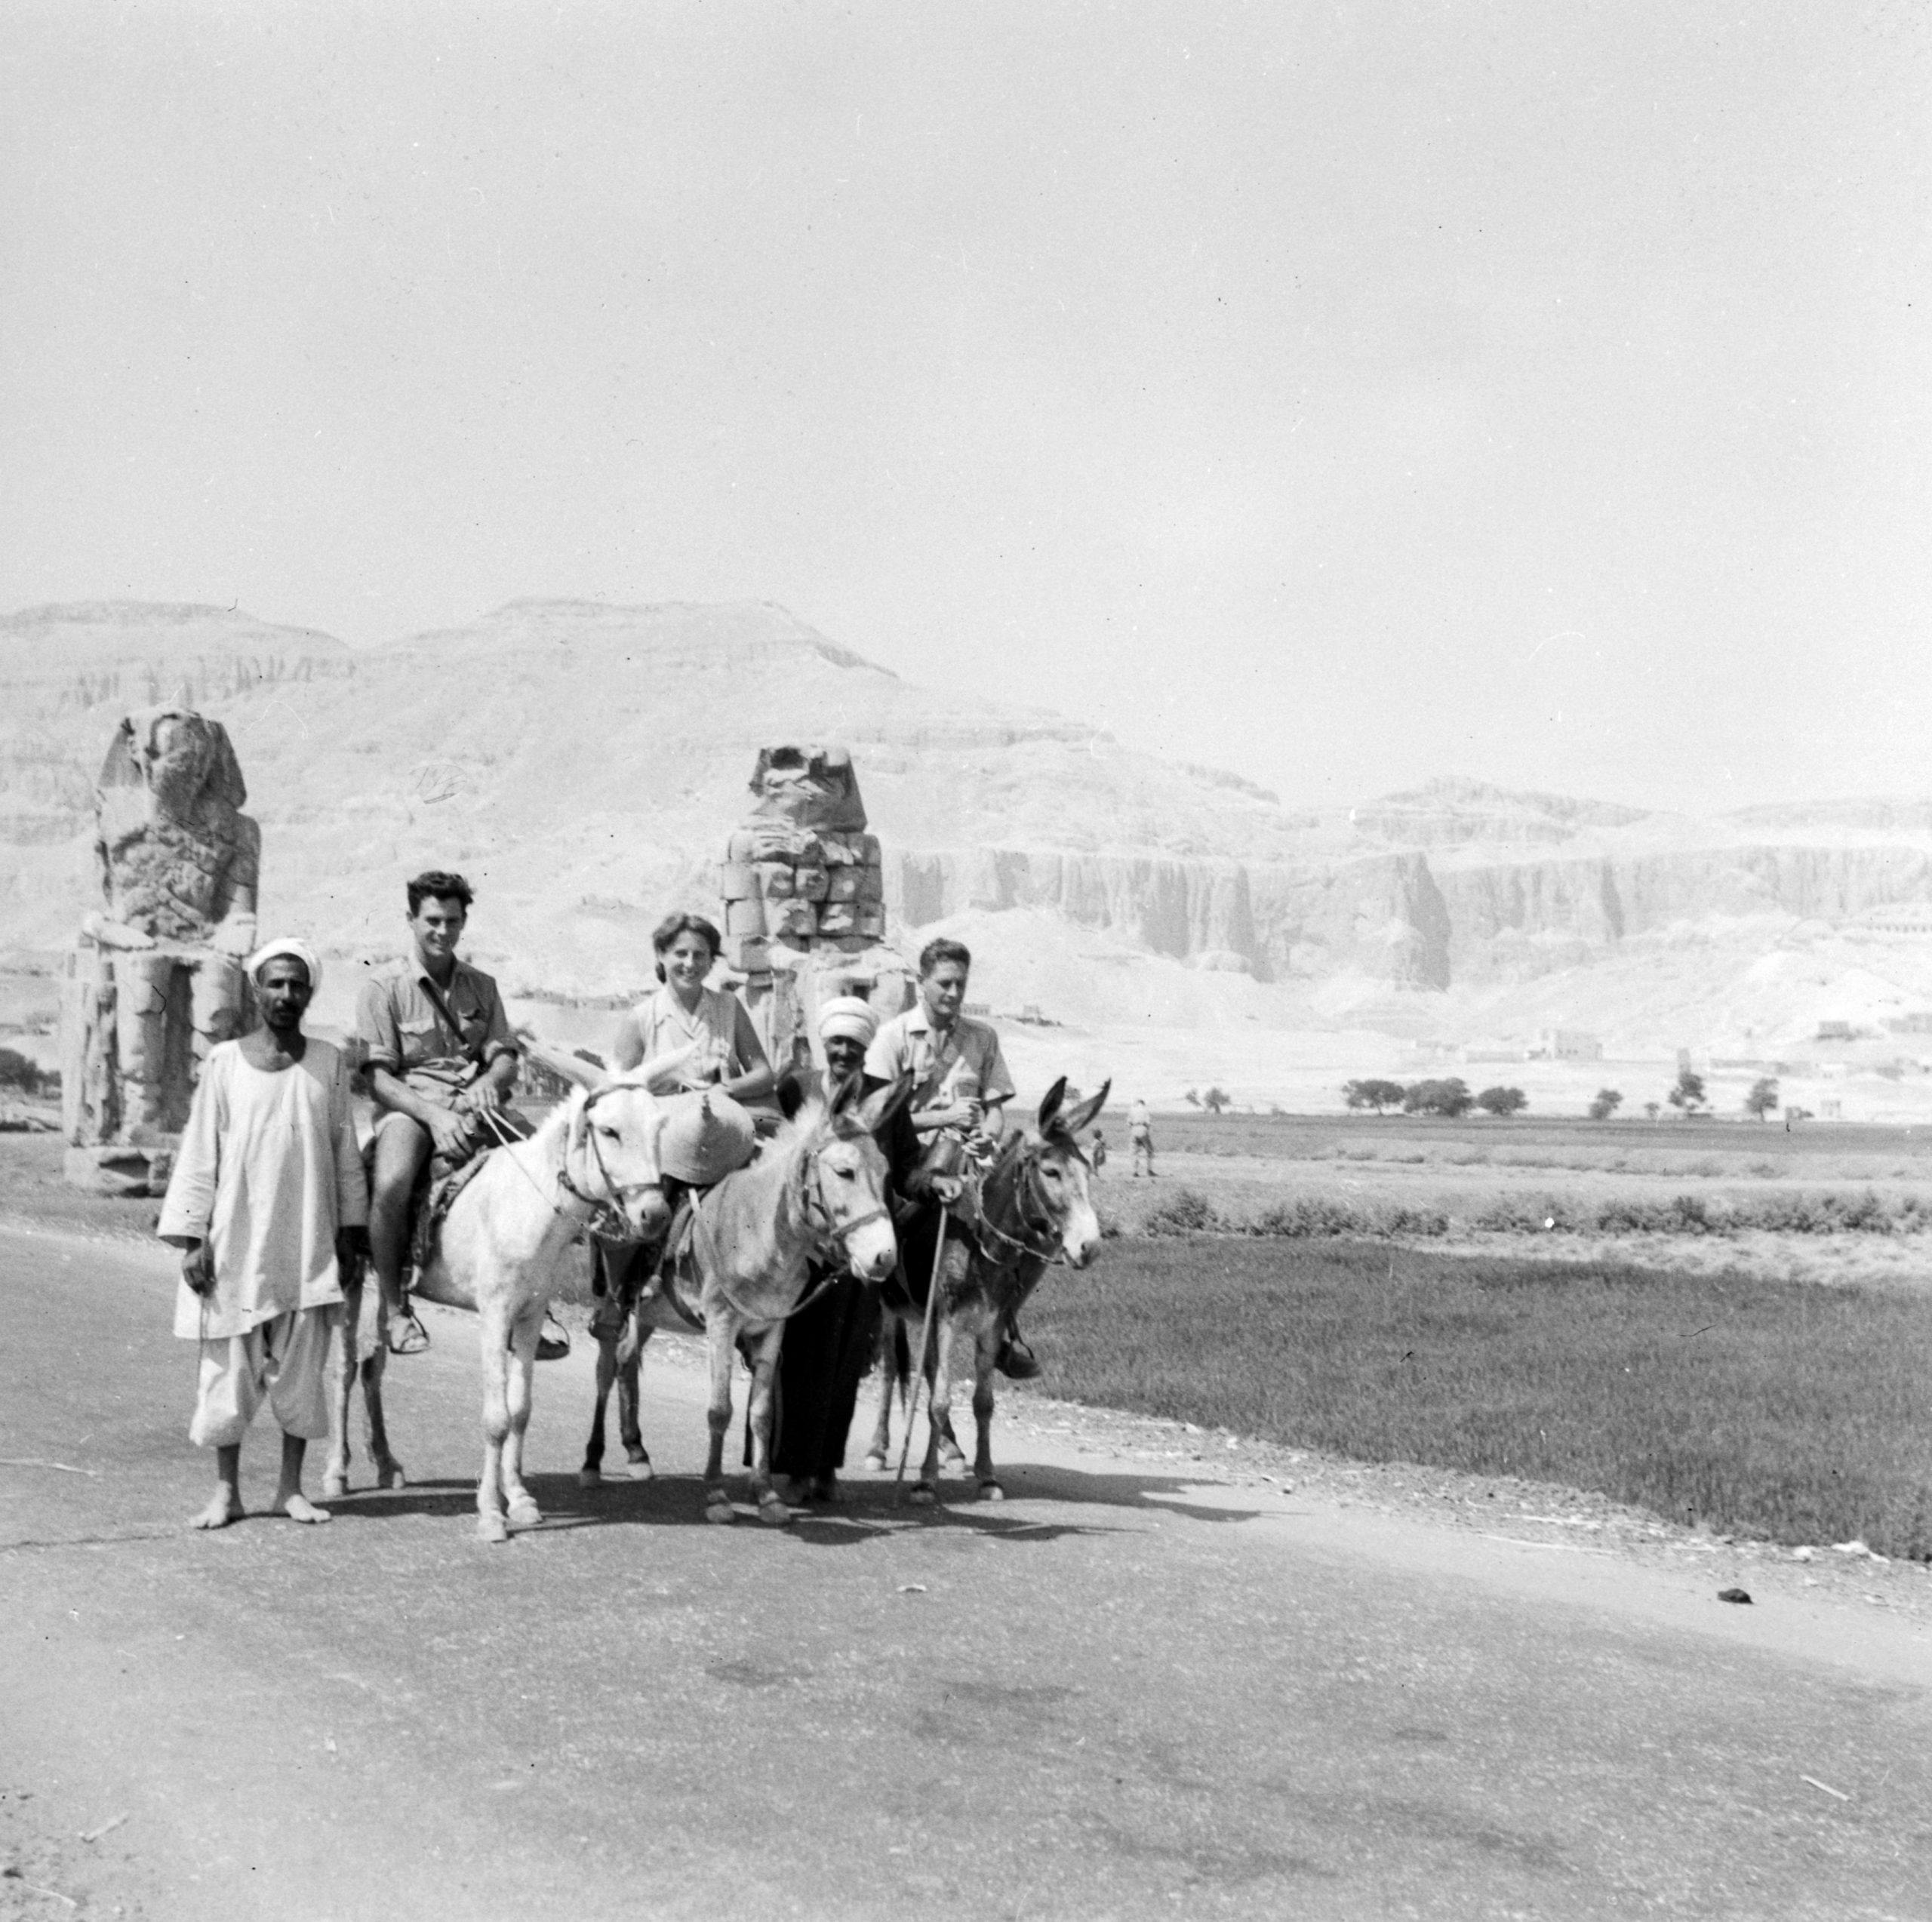 Home is a Journey - March 2 - donkey ride valley of the kings